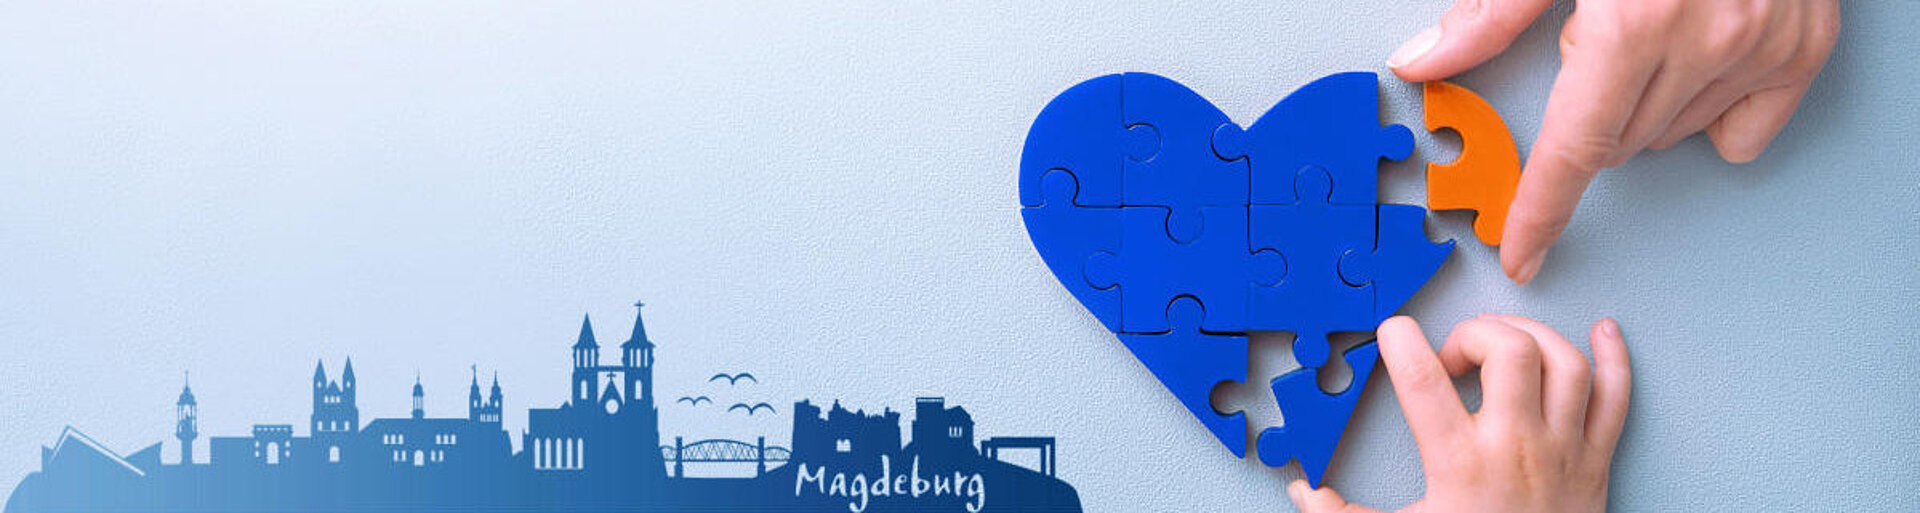 Engagement: Picture shows a blue heart into which an orange puzzle piece is inserted.